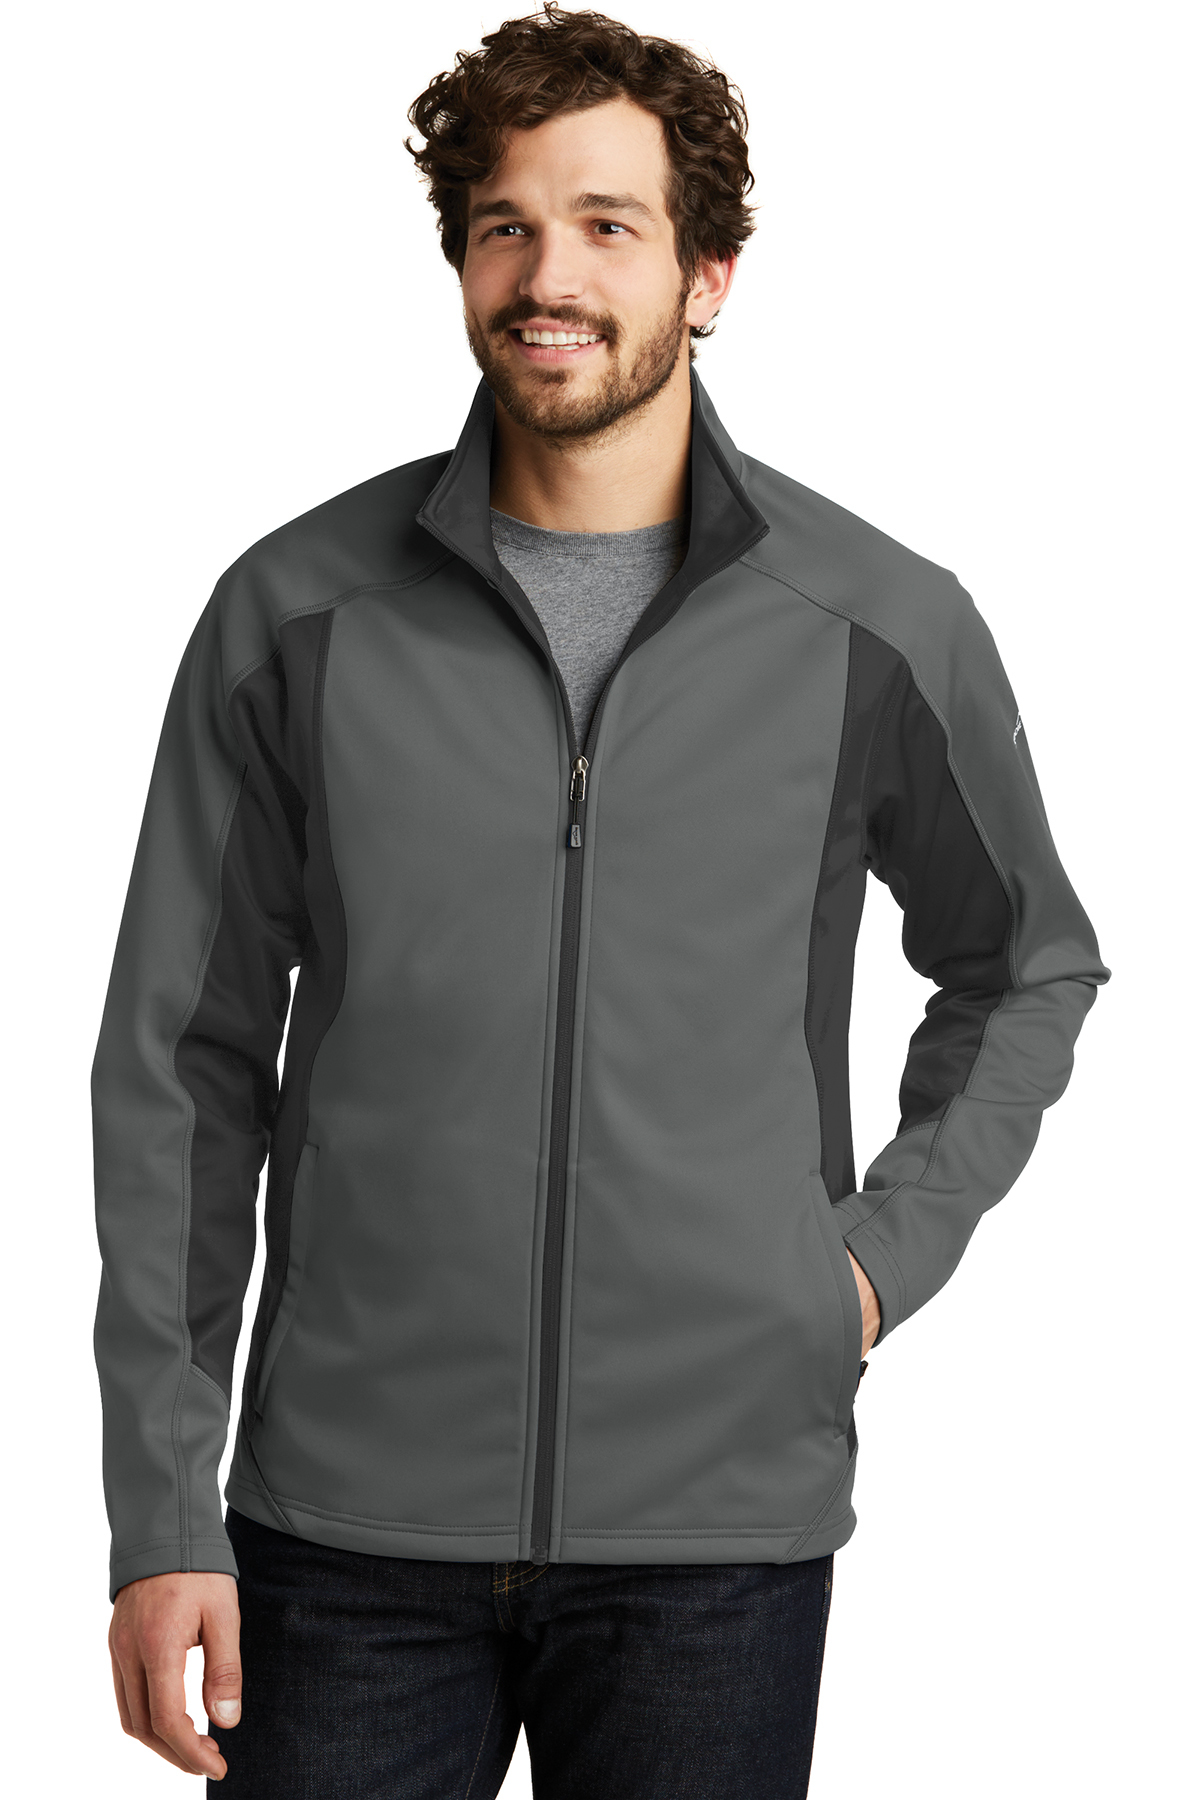 Eddie Bauer® Ladies Trail Soft Shell Jacket  Horizon Promotional Products  - Buy promotional products in Jacksonville, Florida United States